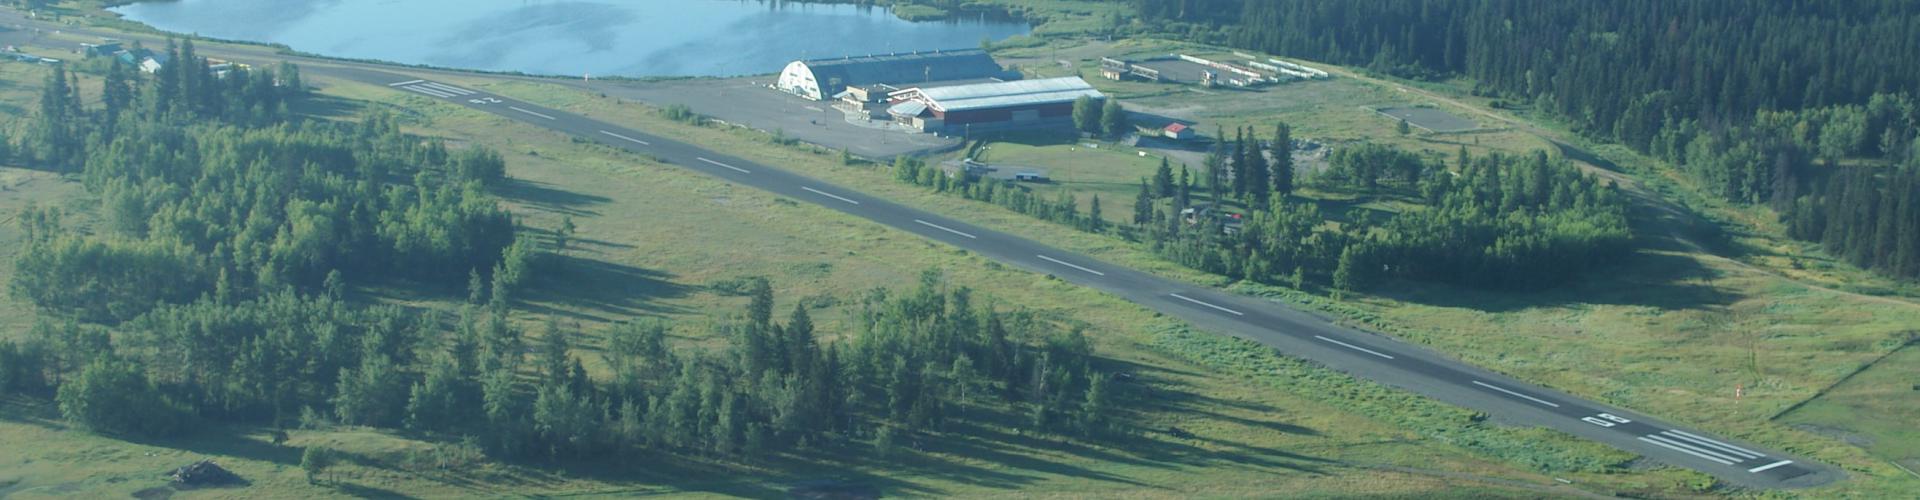 100 Mile House Municipal Airport Aerial View